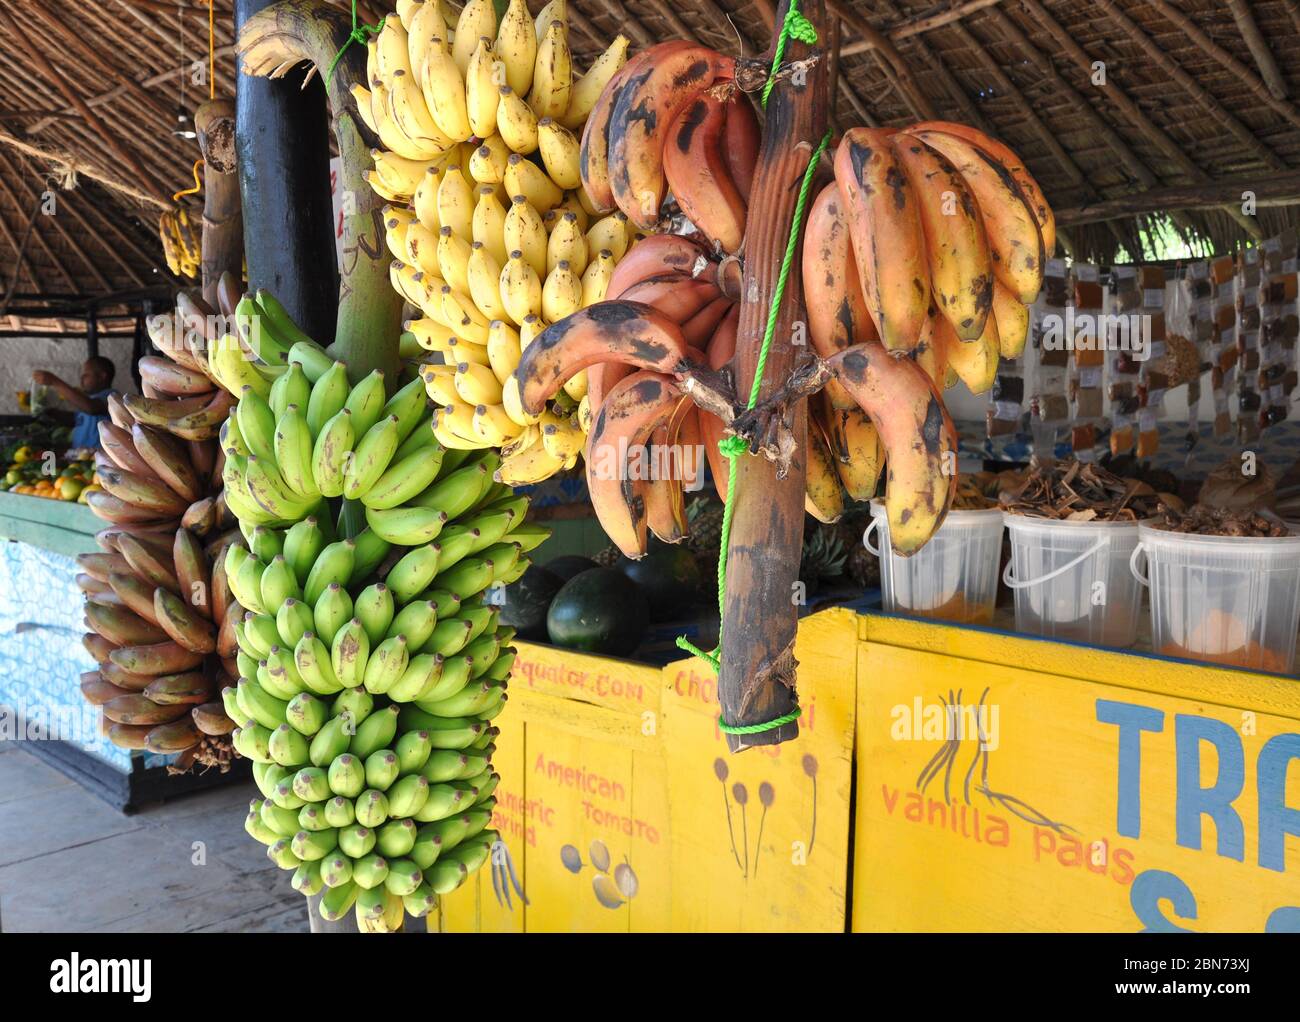 Different types of bananas for sale in a market stall. Tanzania, Africa Stock Photo